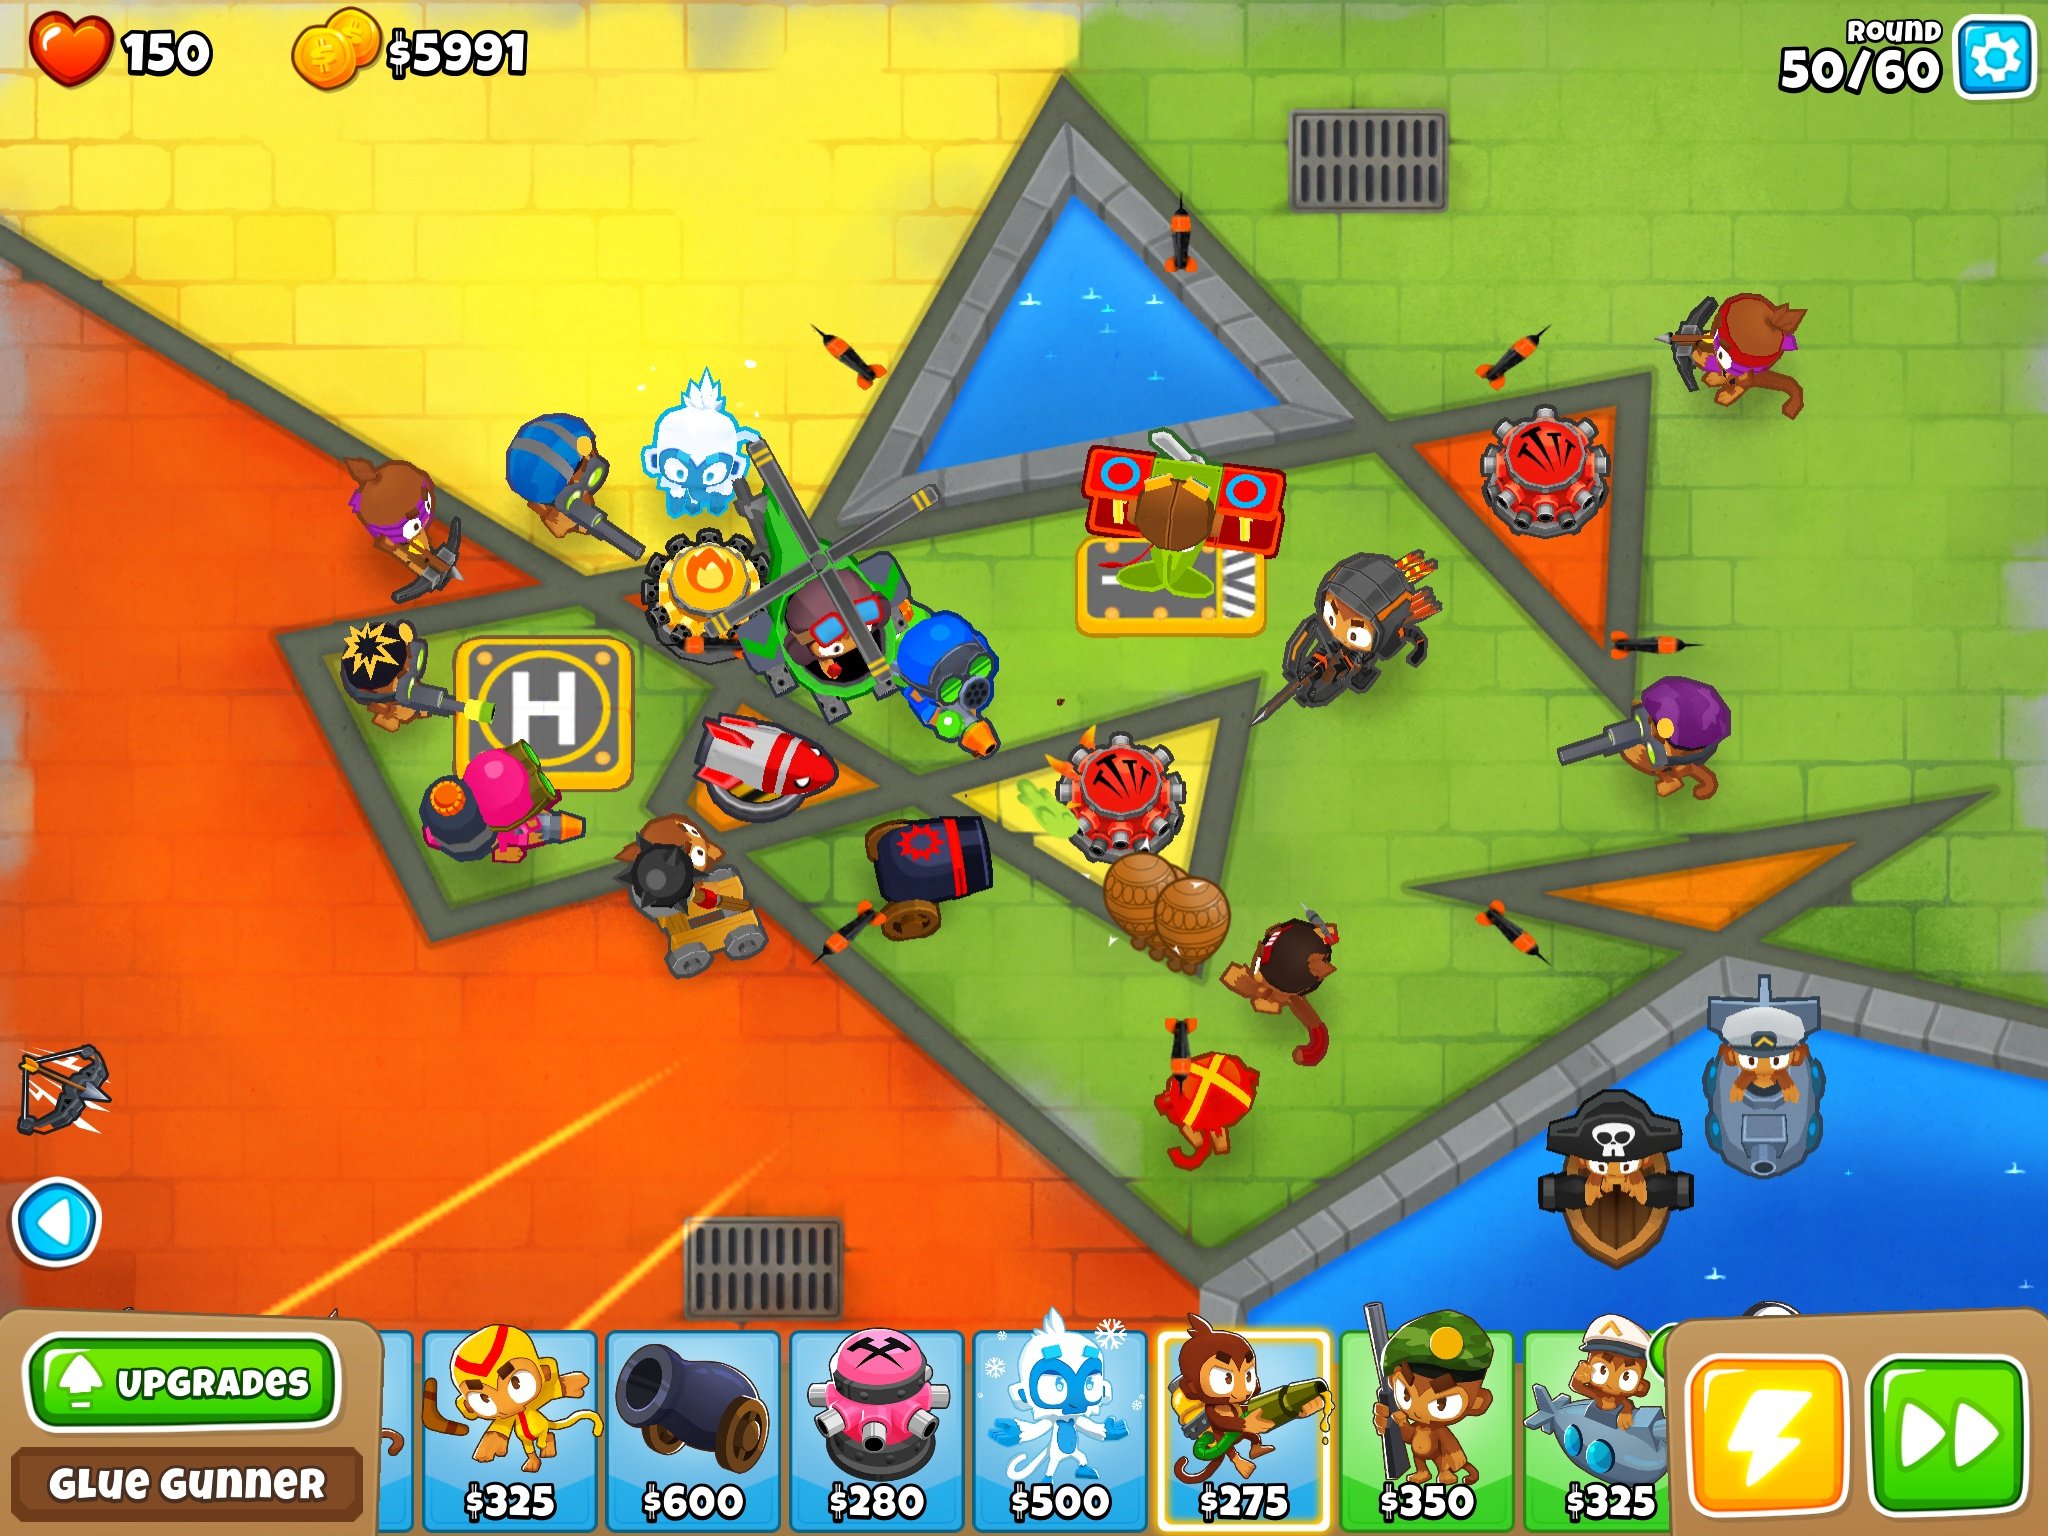 Bloons Td 6 Review The Game Where Everything Happens So Much